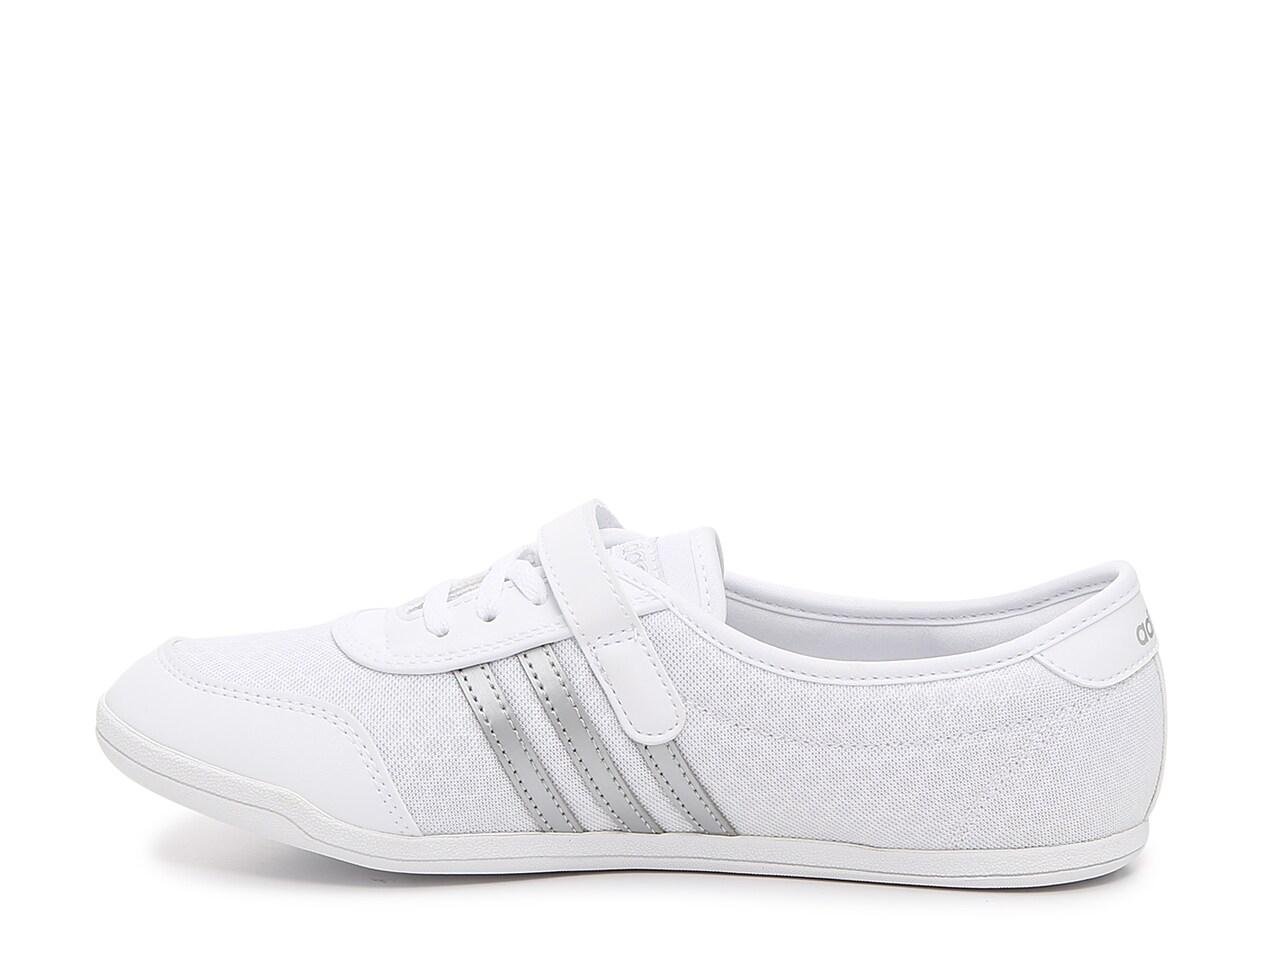 adidas Synthetic Diona Slip-on Sneaker in White | Lyst كوكاتو بيضاء